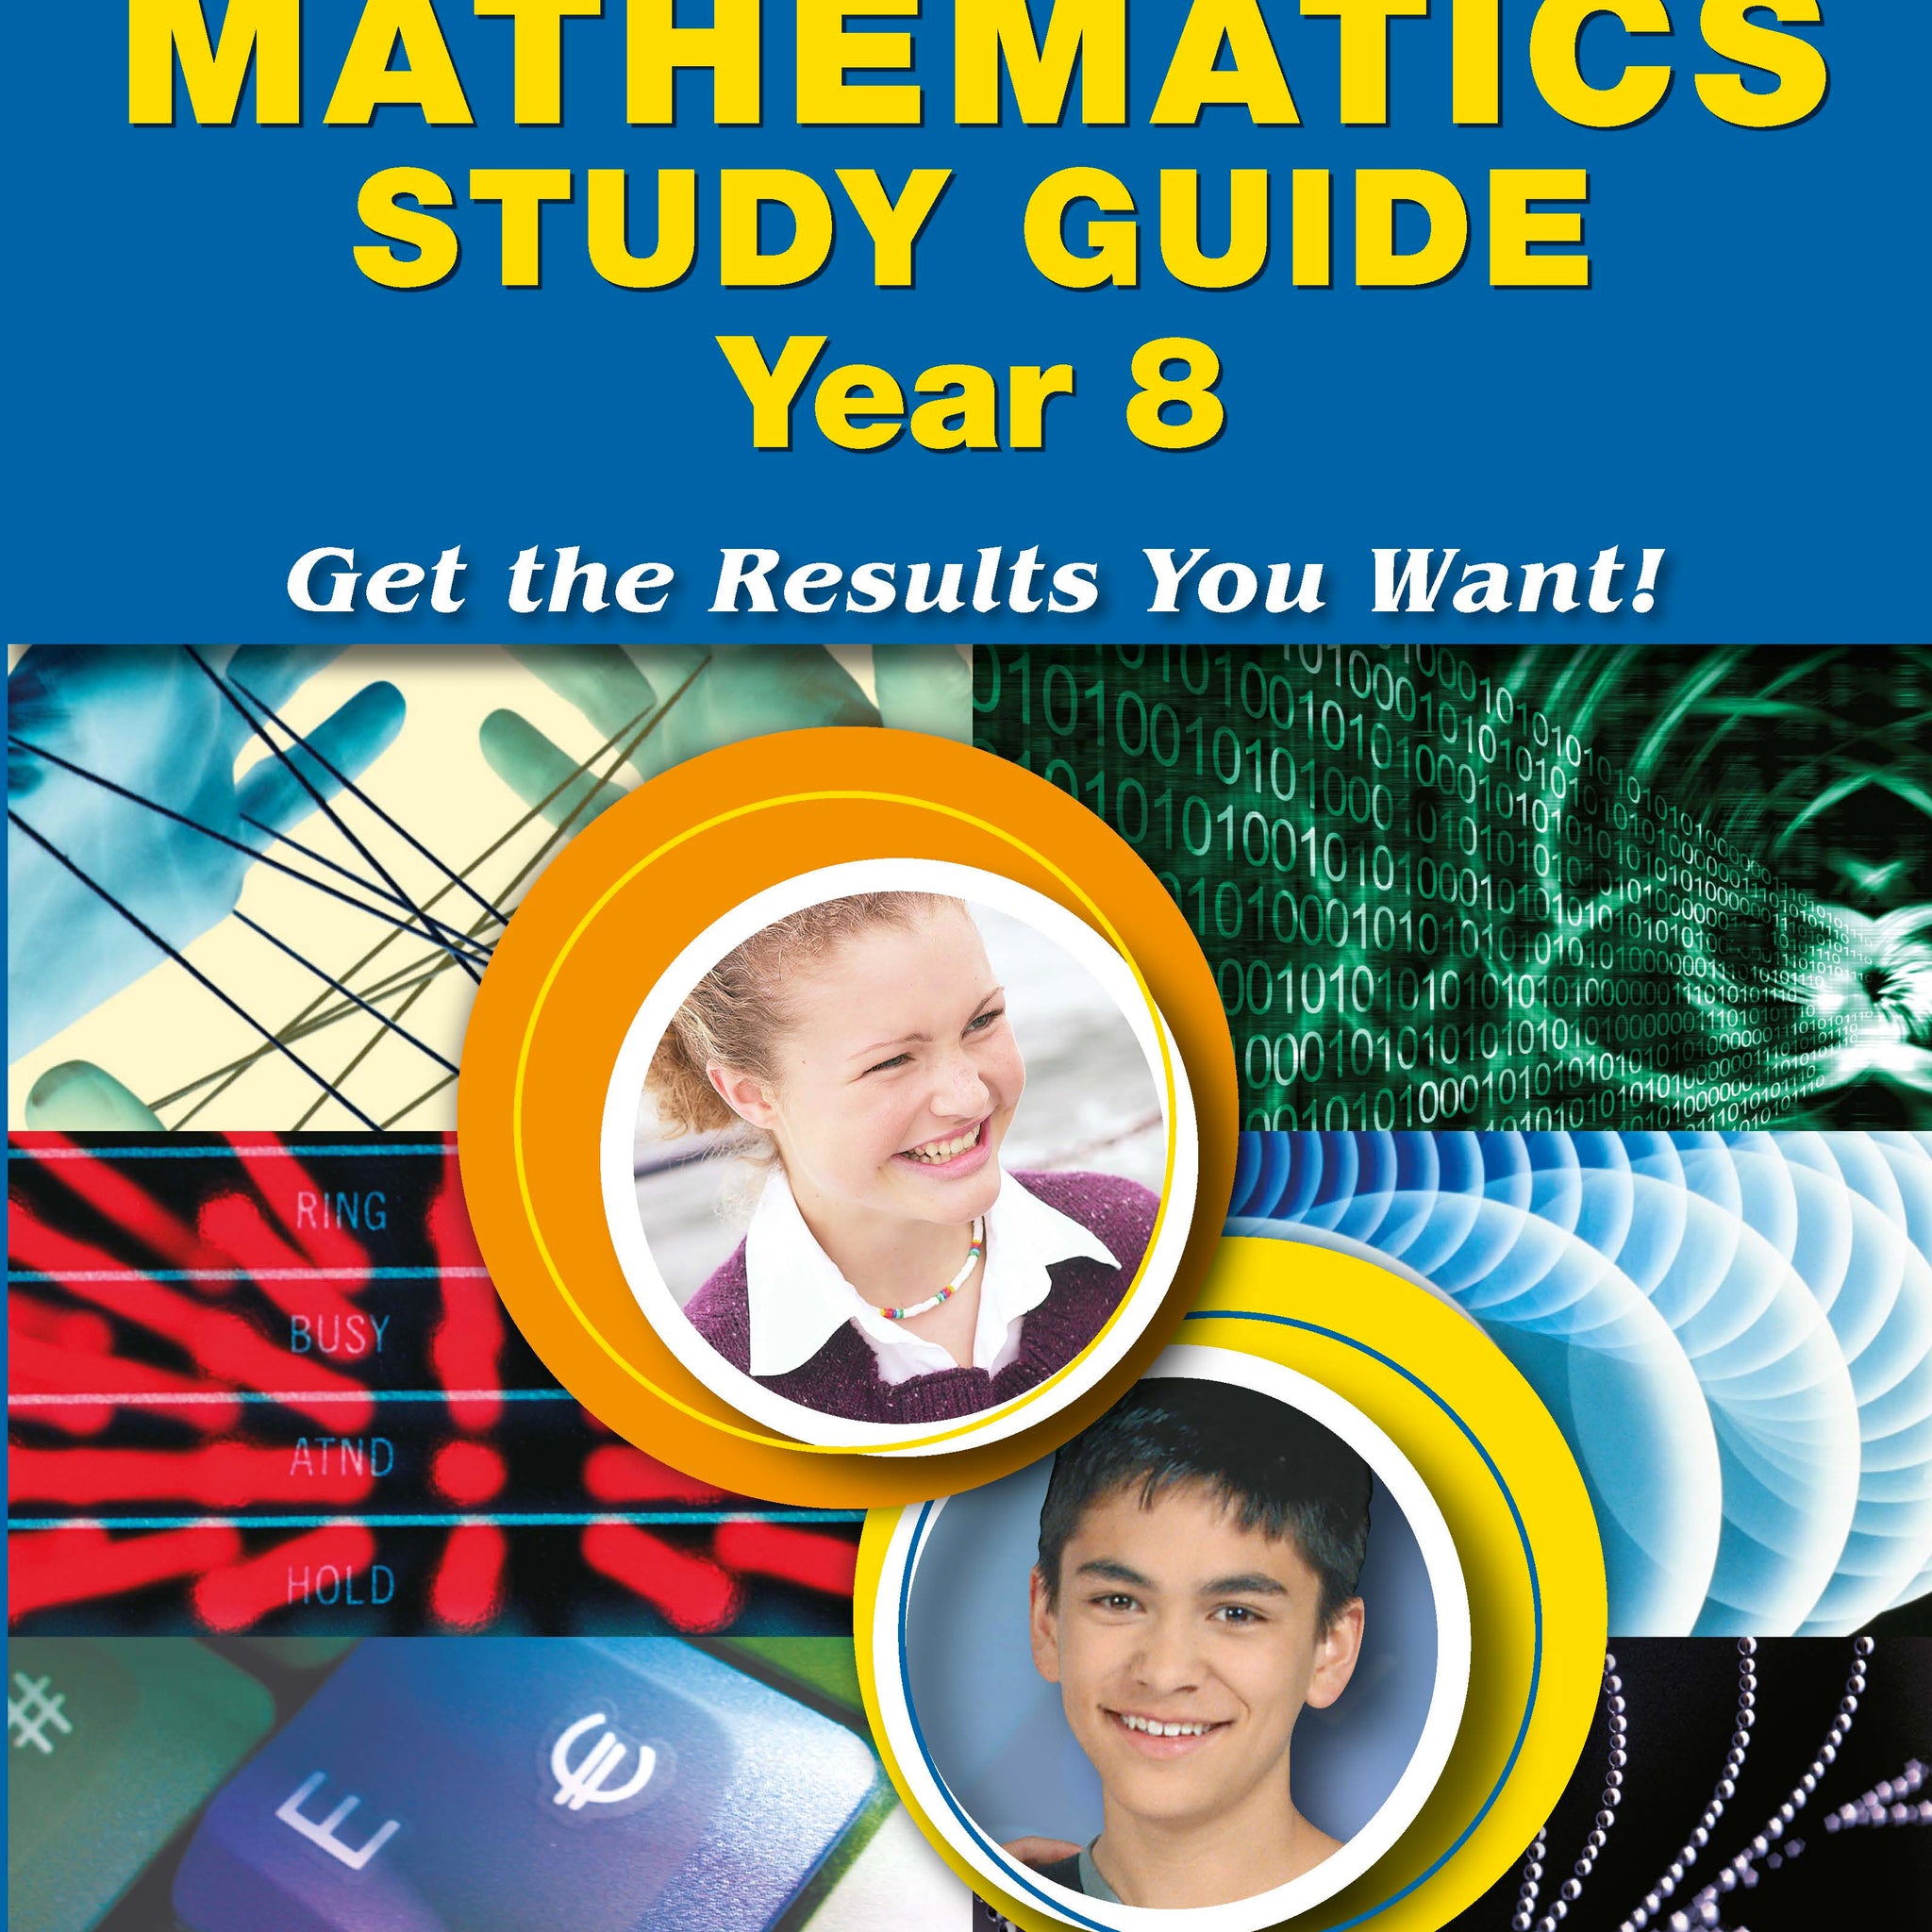 Excel Mathematics Study Guide Year 8